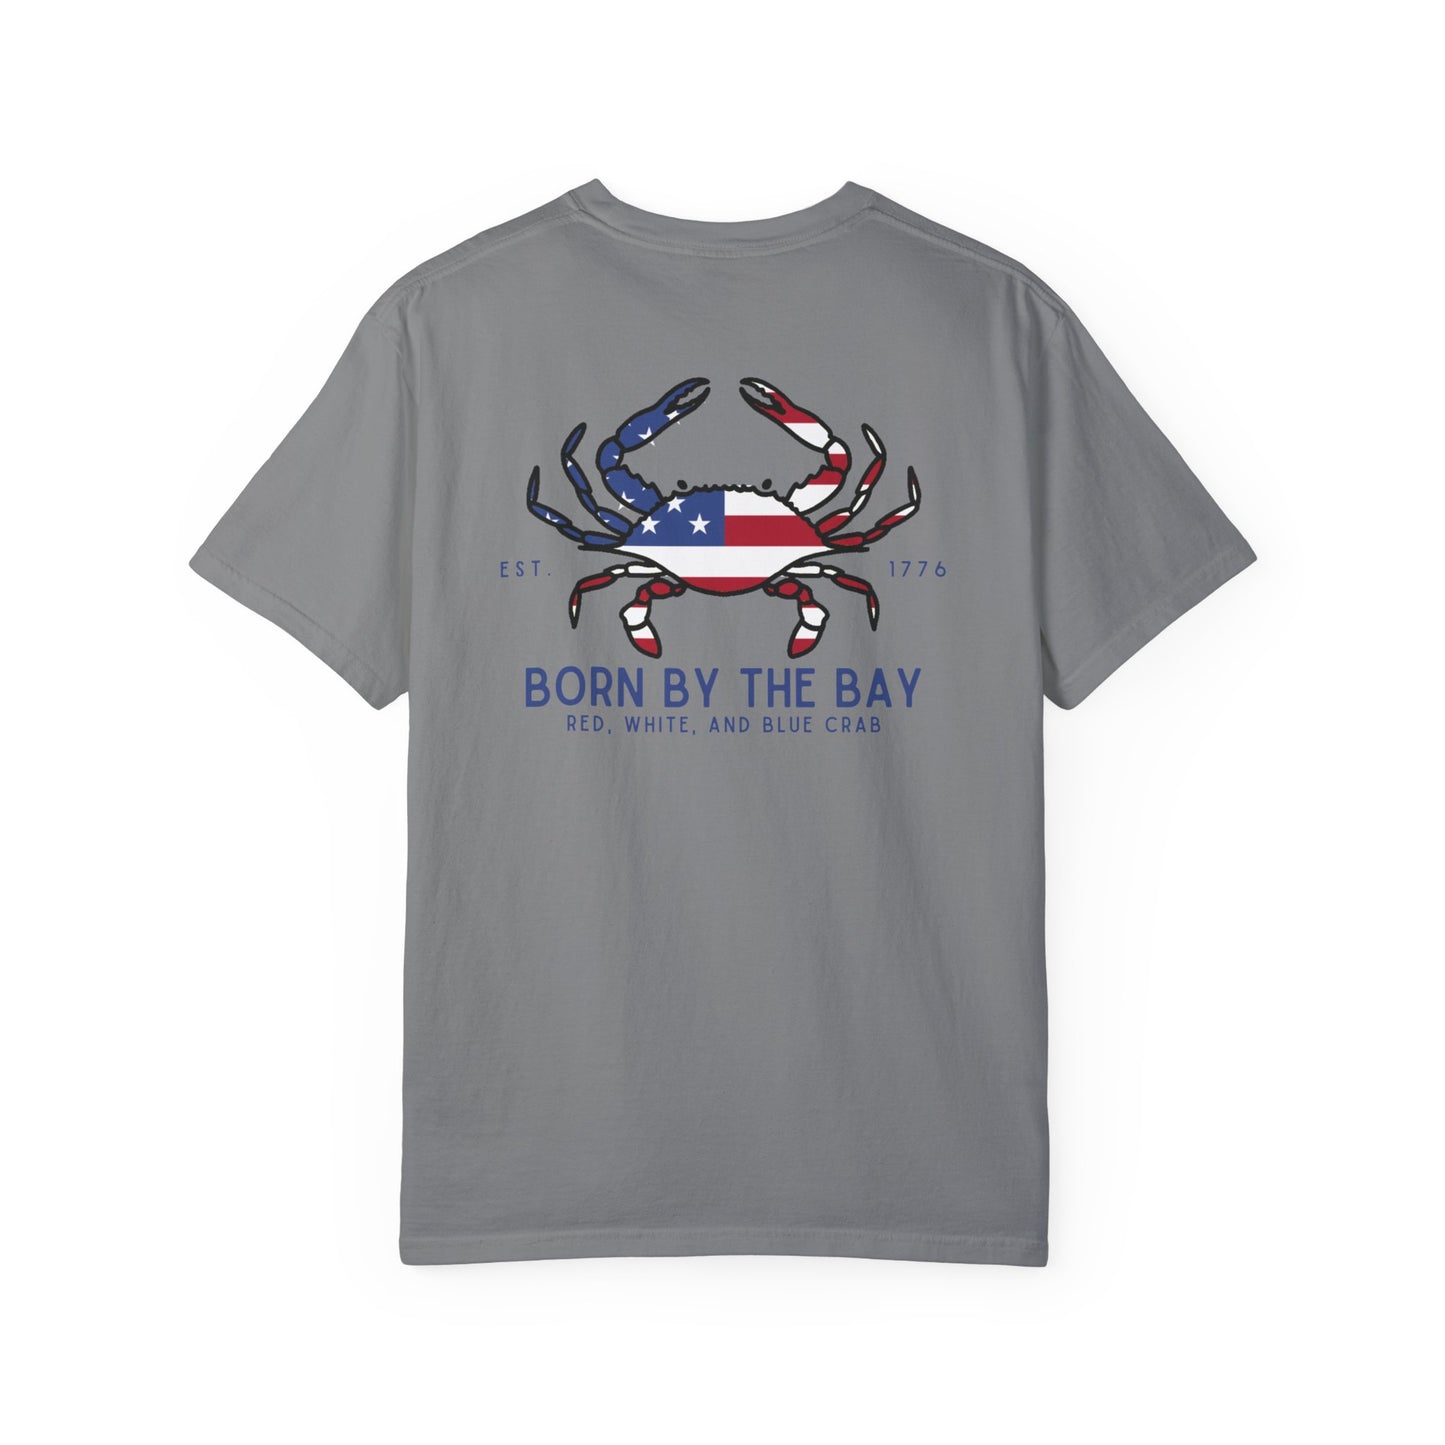 "Red, White & Blue Crab" Tee